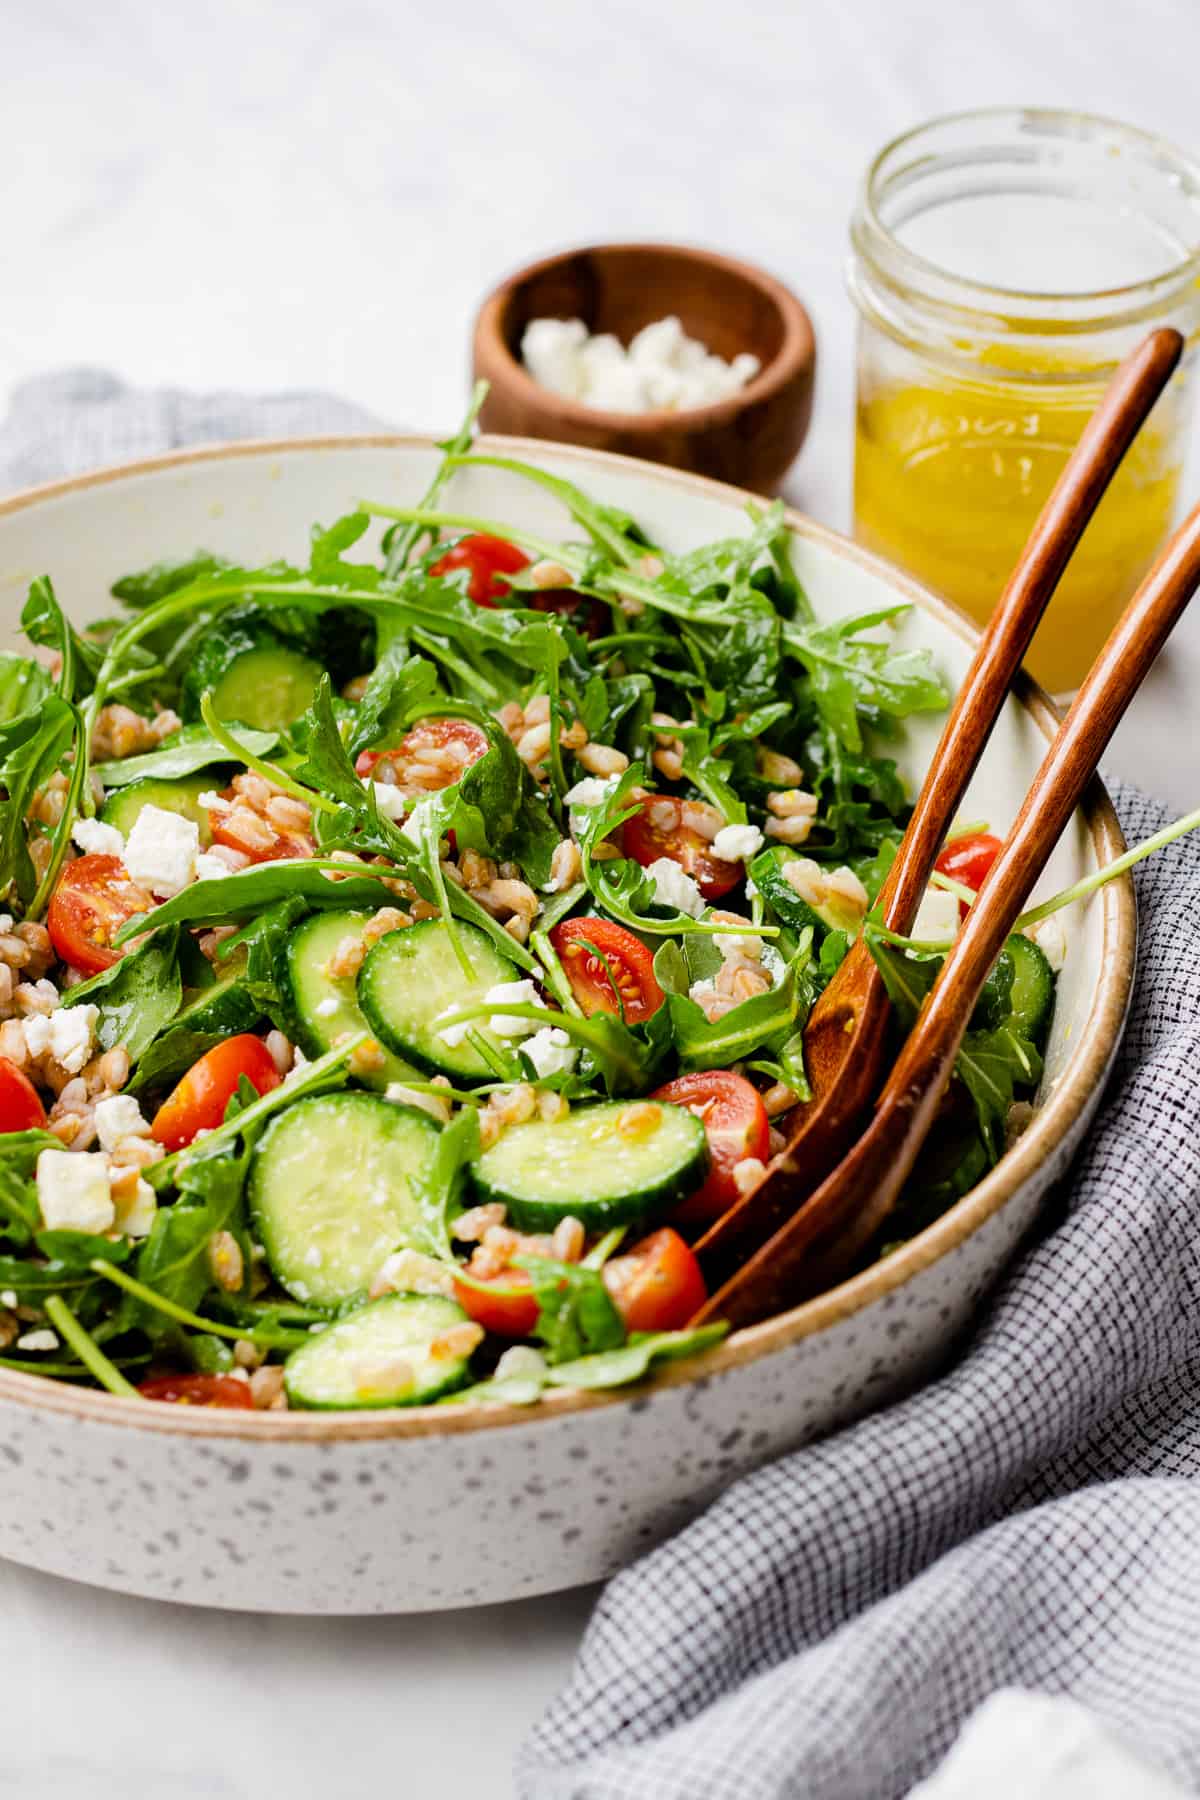 Farro salad with arugula, cucumbers, and tomatoes in a bowl.